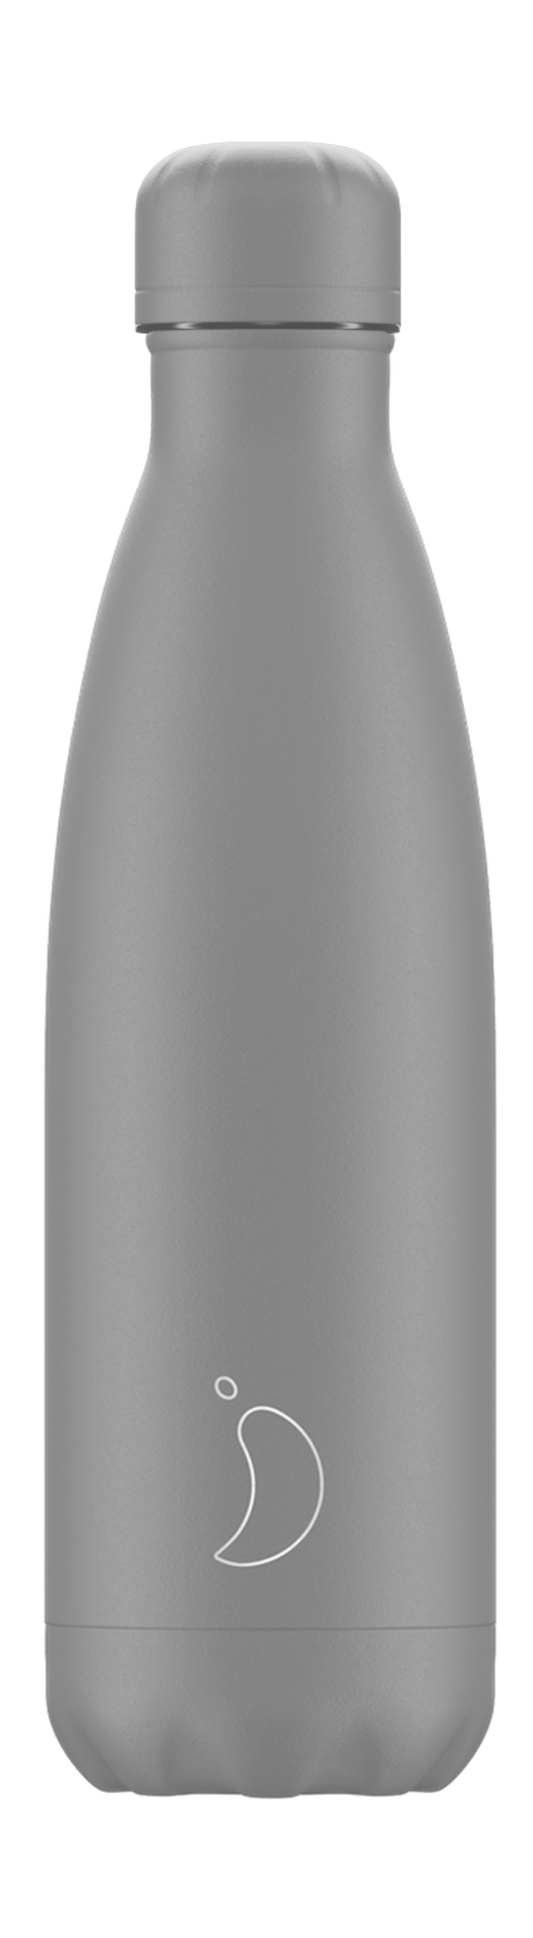 All Grey Monochrome Chilly's Bottle 500 ml